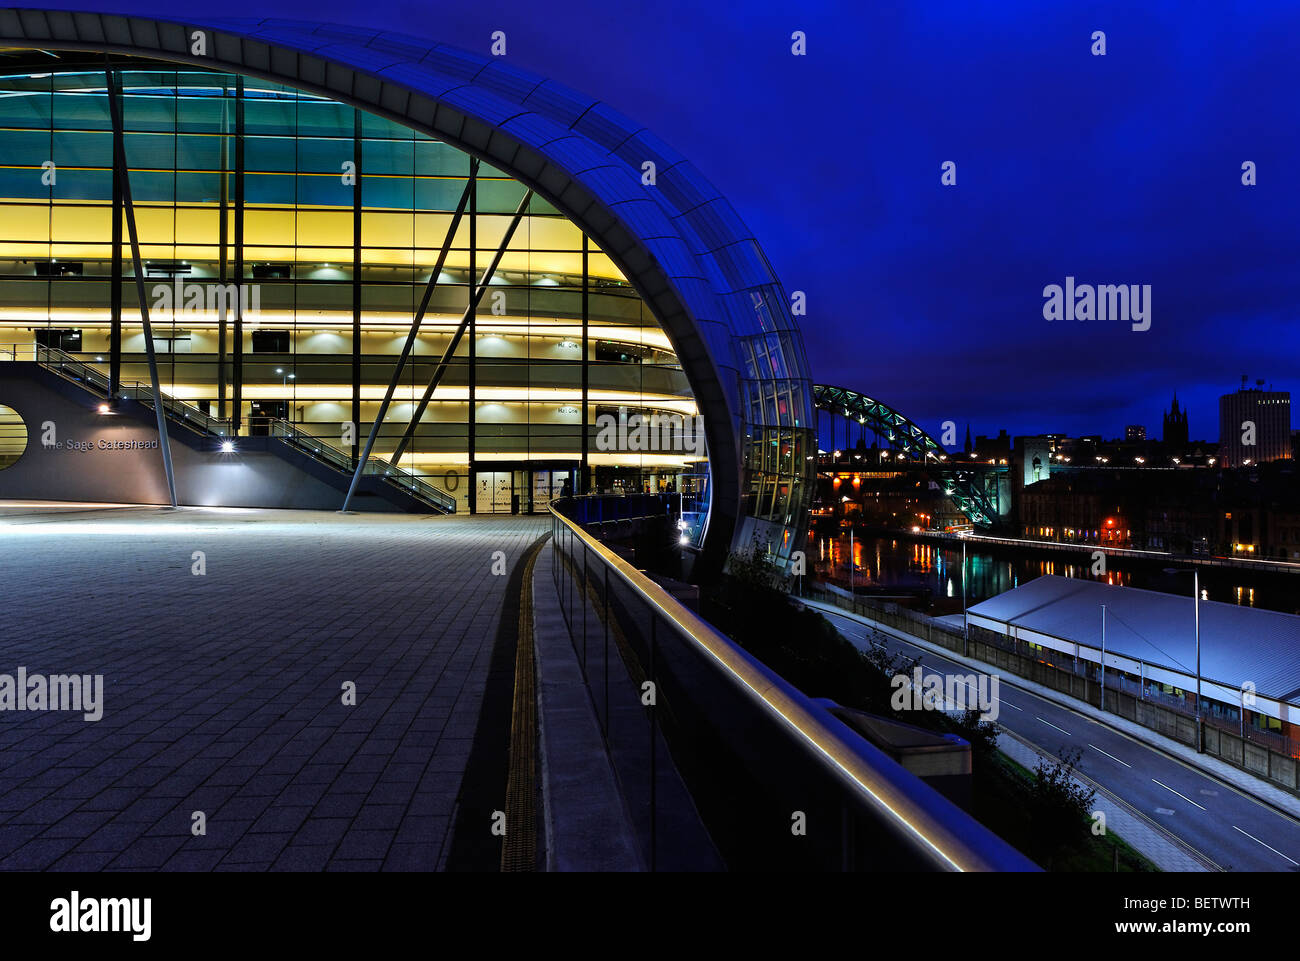 The Sage Concert Centre overlooking the River Tyne in Gateshead Stock Photo